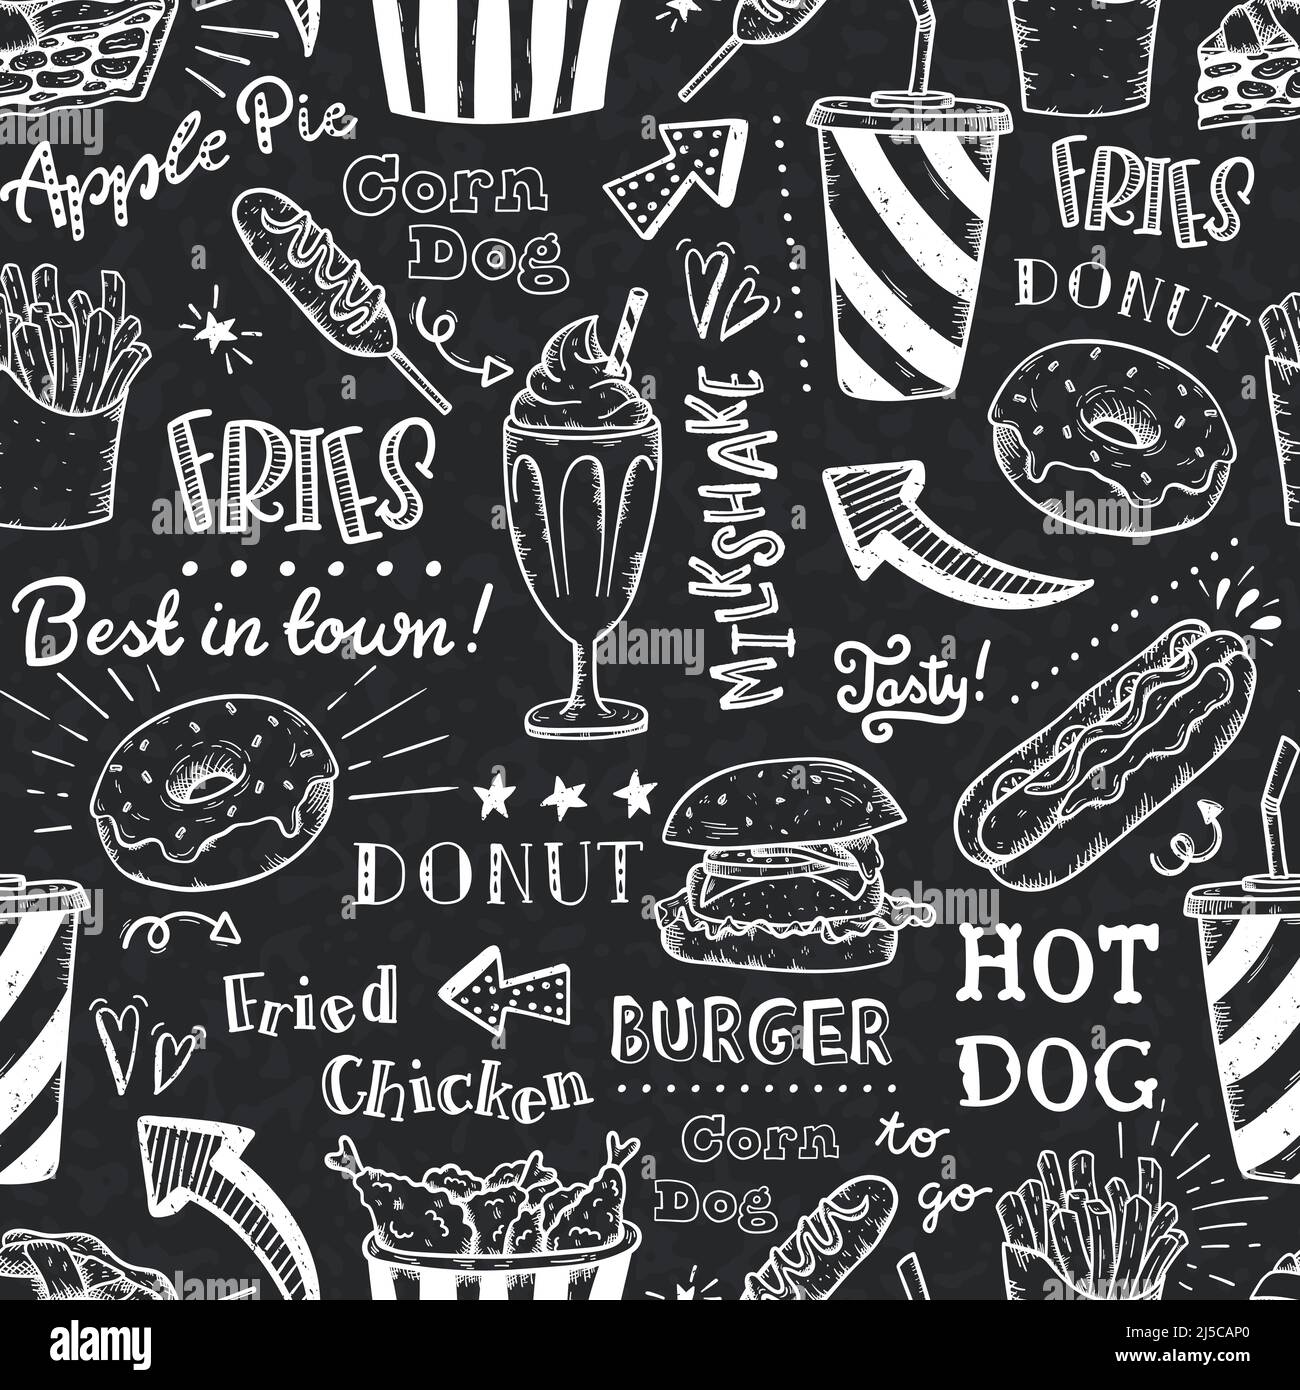 Wallpaper Fast Food Vector Images over 4600